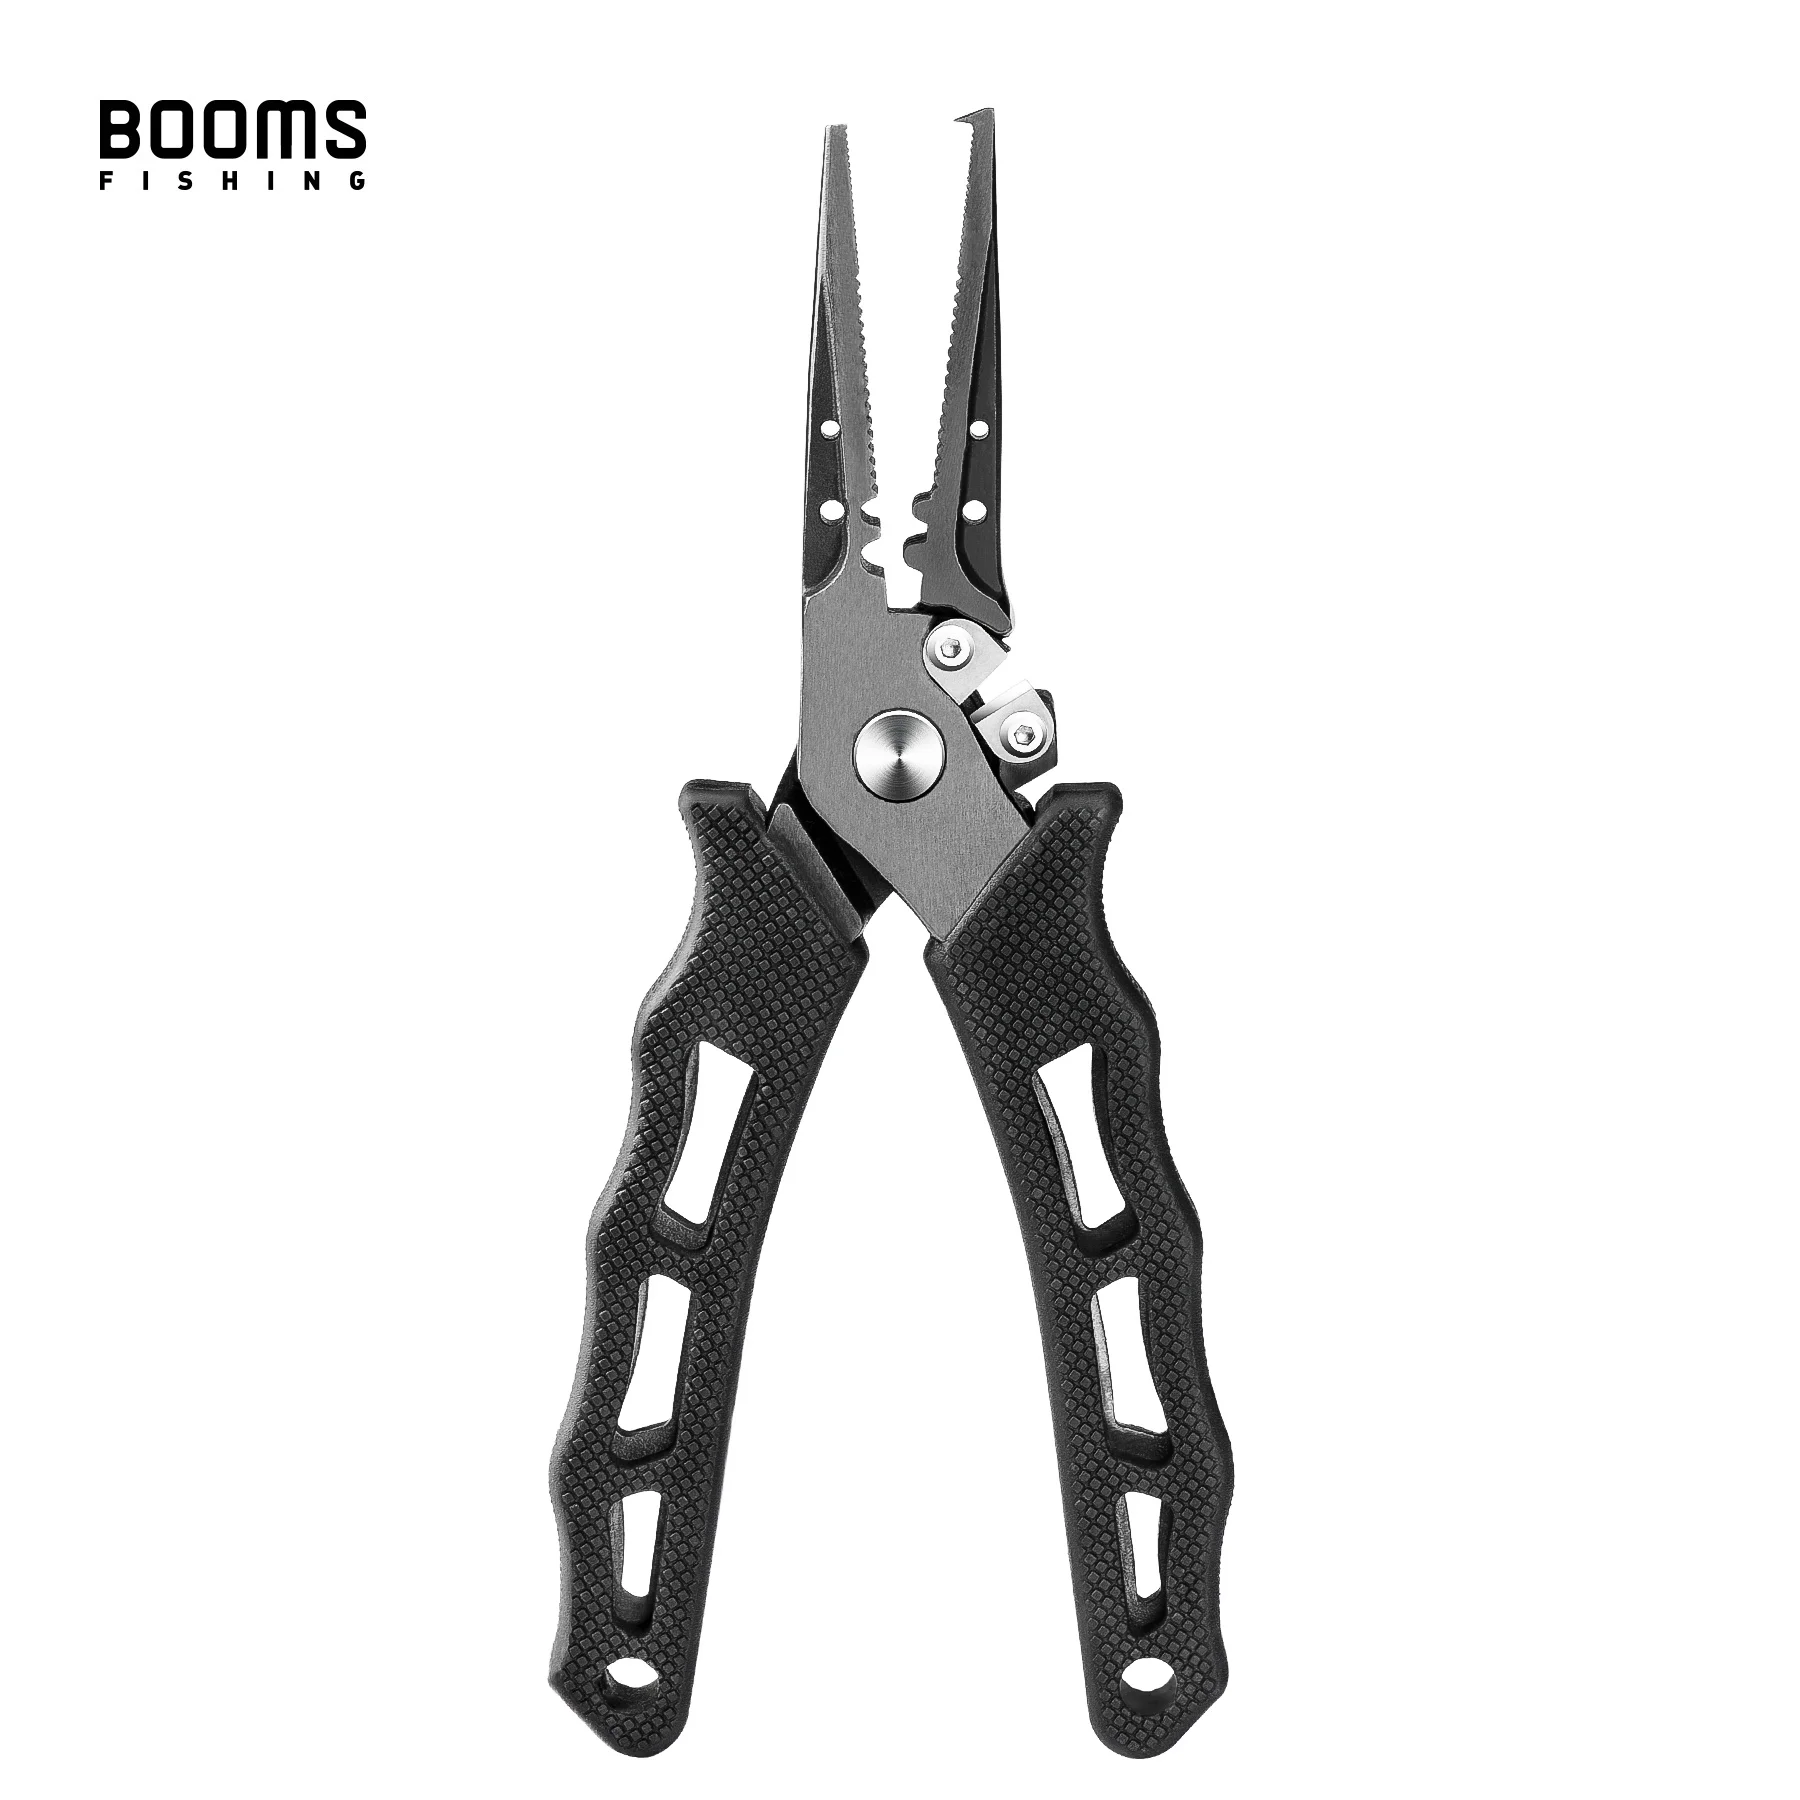 Booms Fishing F07 Stainless Steel Fishing Pliers Braid line Cutters Crimper Hook Remover Saltwater Resistant Fishing Gear Tool